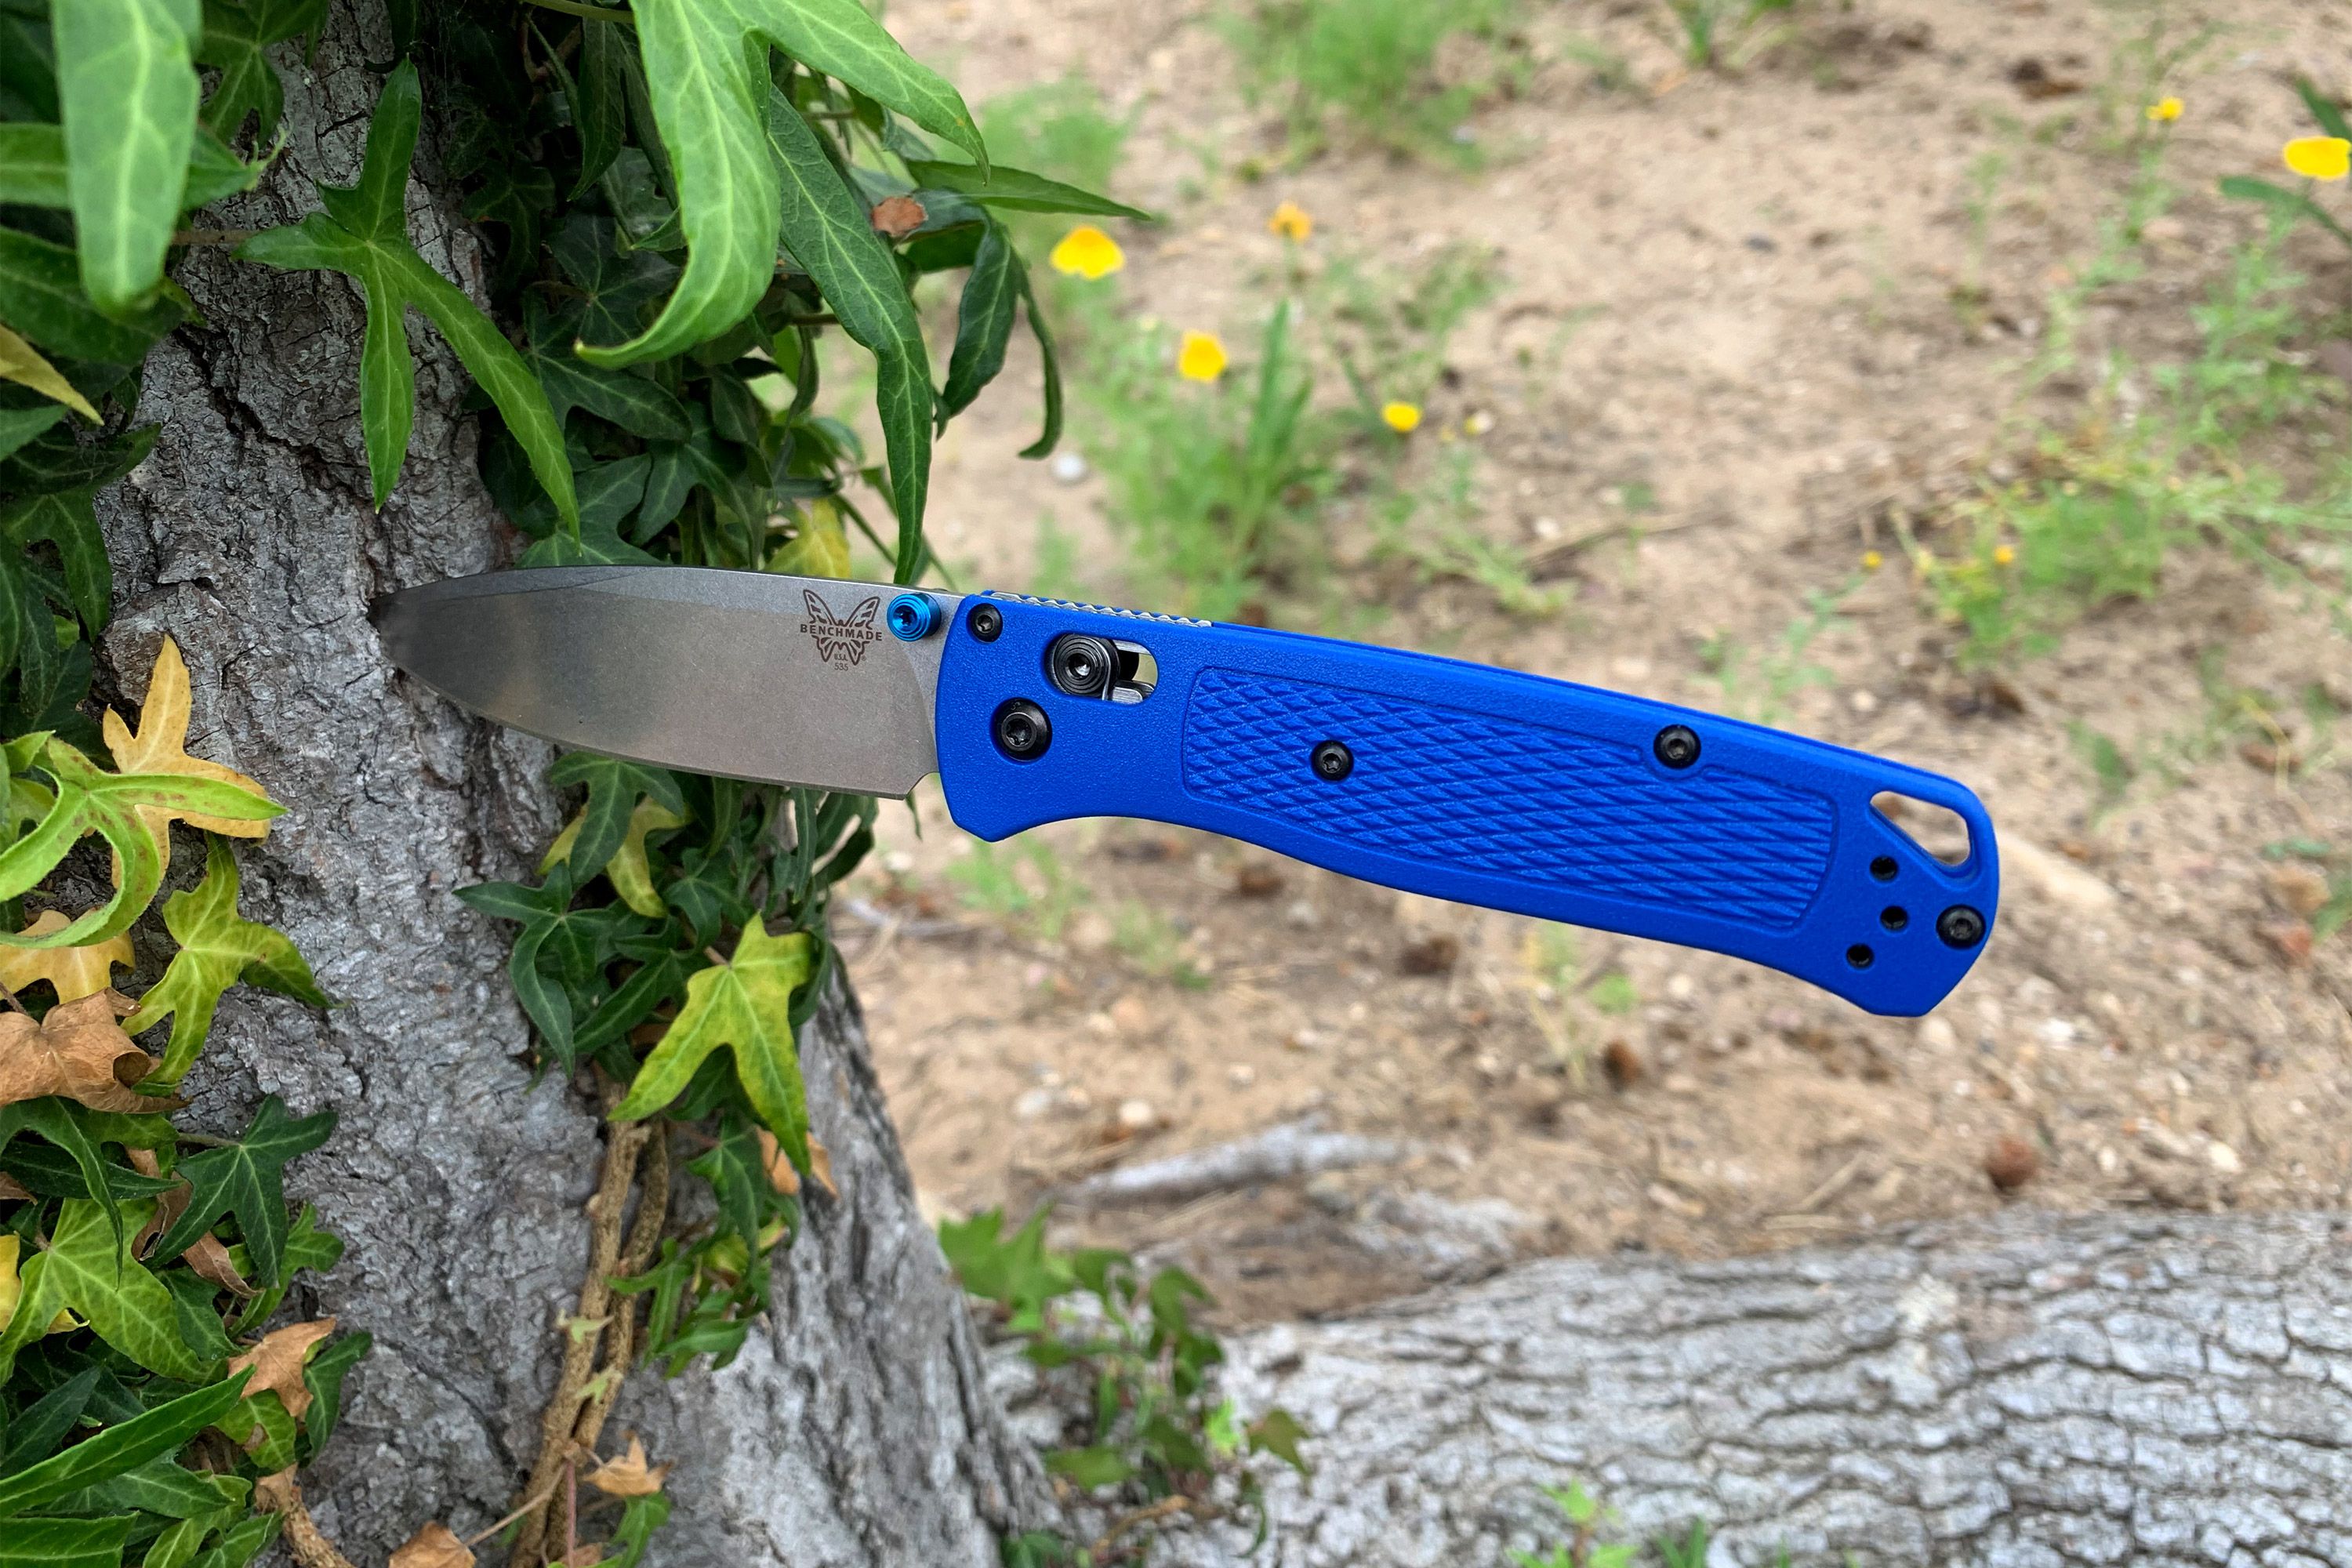 Benchmade Culinary, Bringing EDC Into The Home